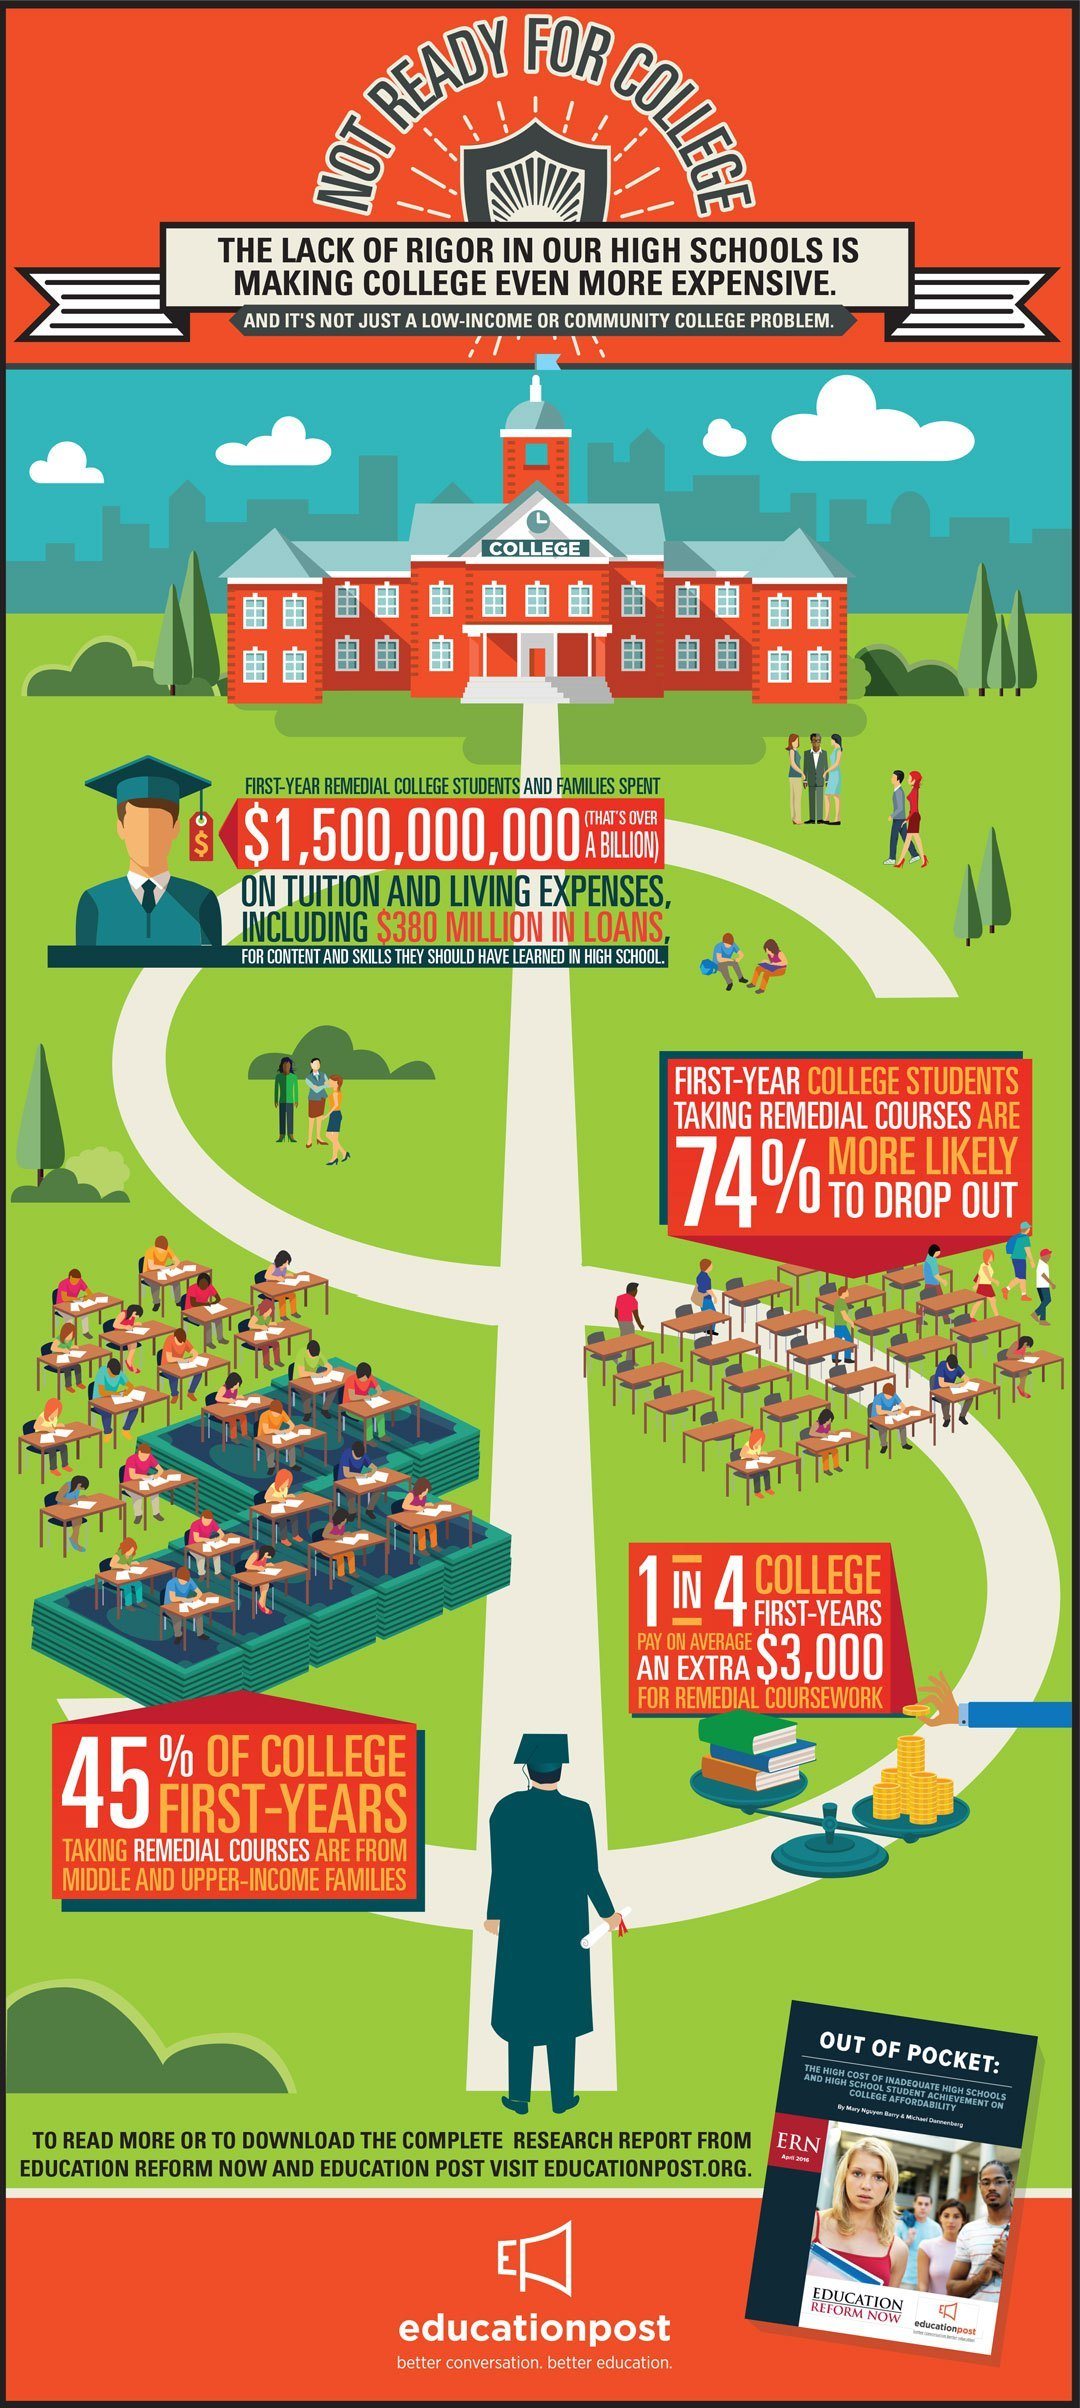 Not Ready for College Infographic